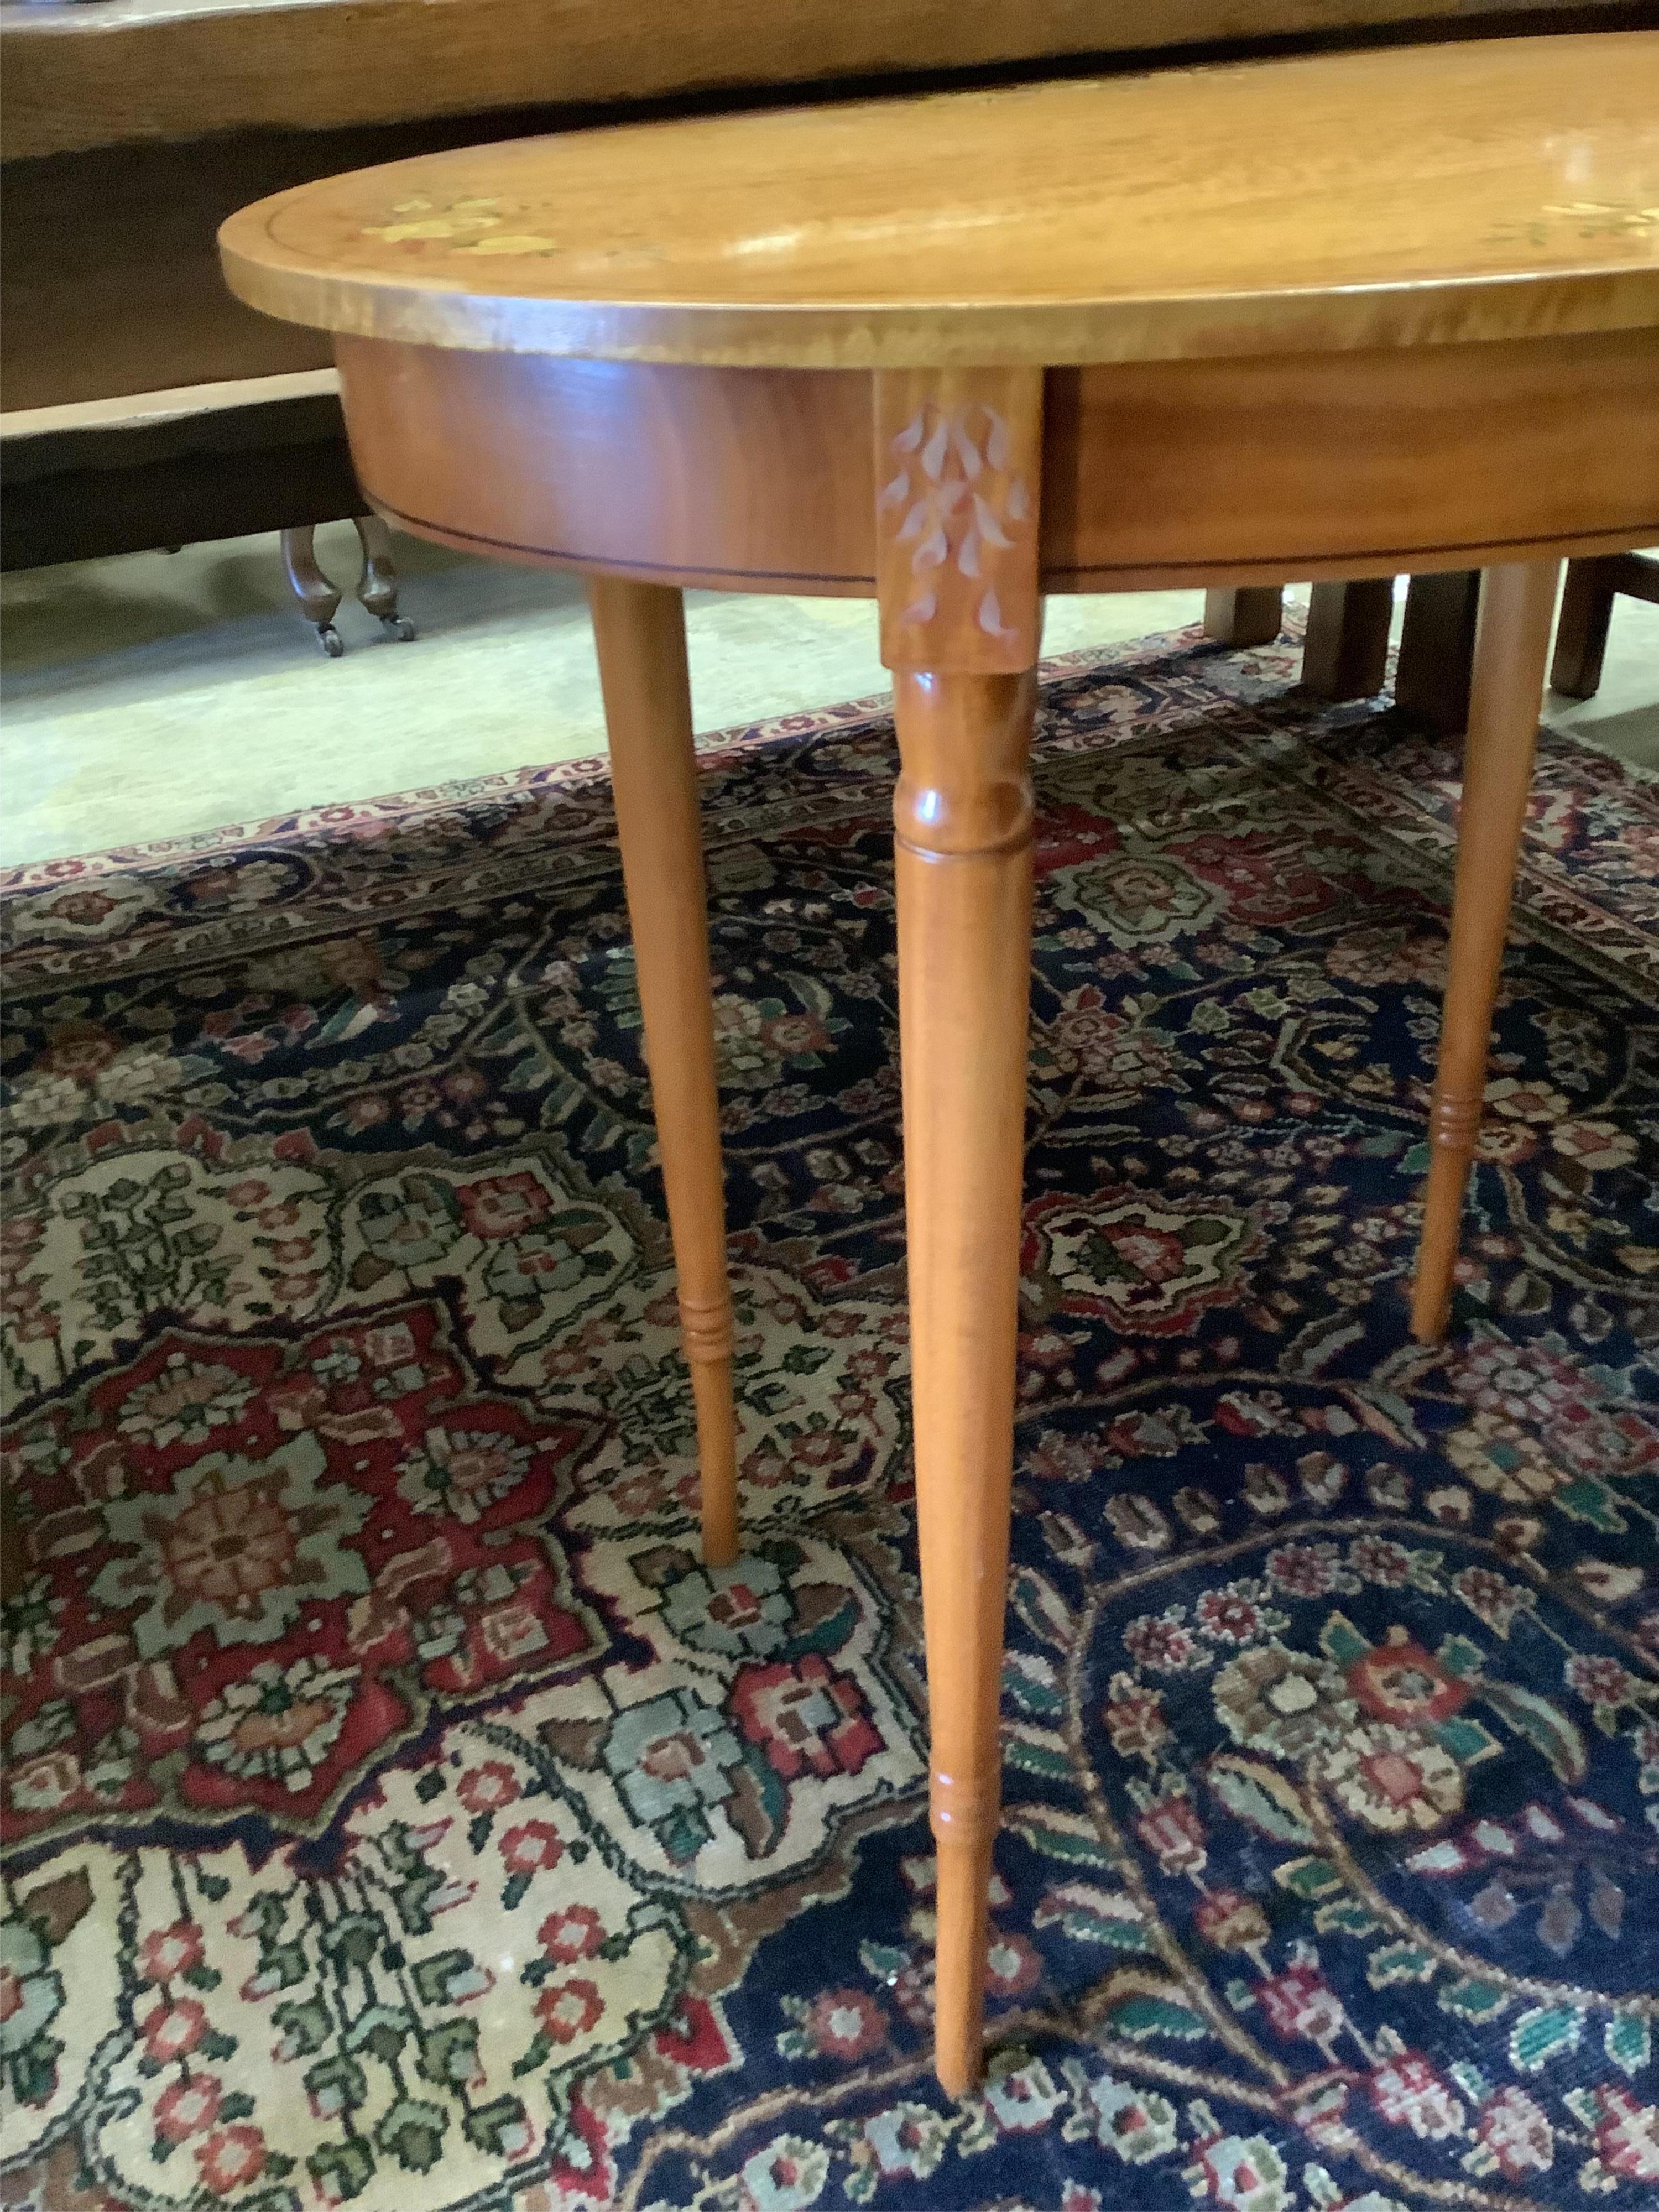 A painted oval satinwood occasional table, width 74cm, depth 51cm, height 70cm